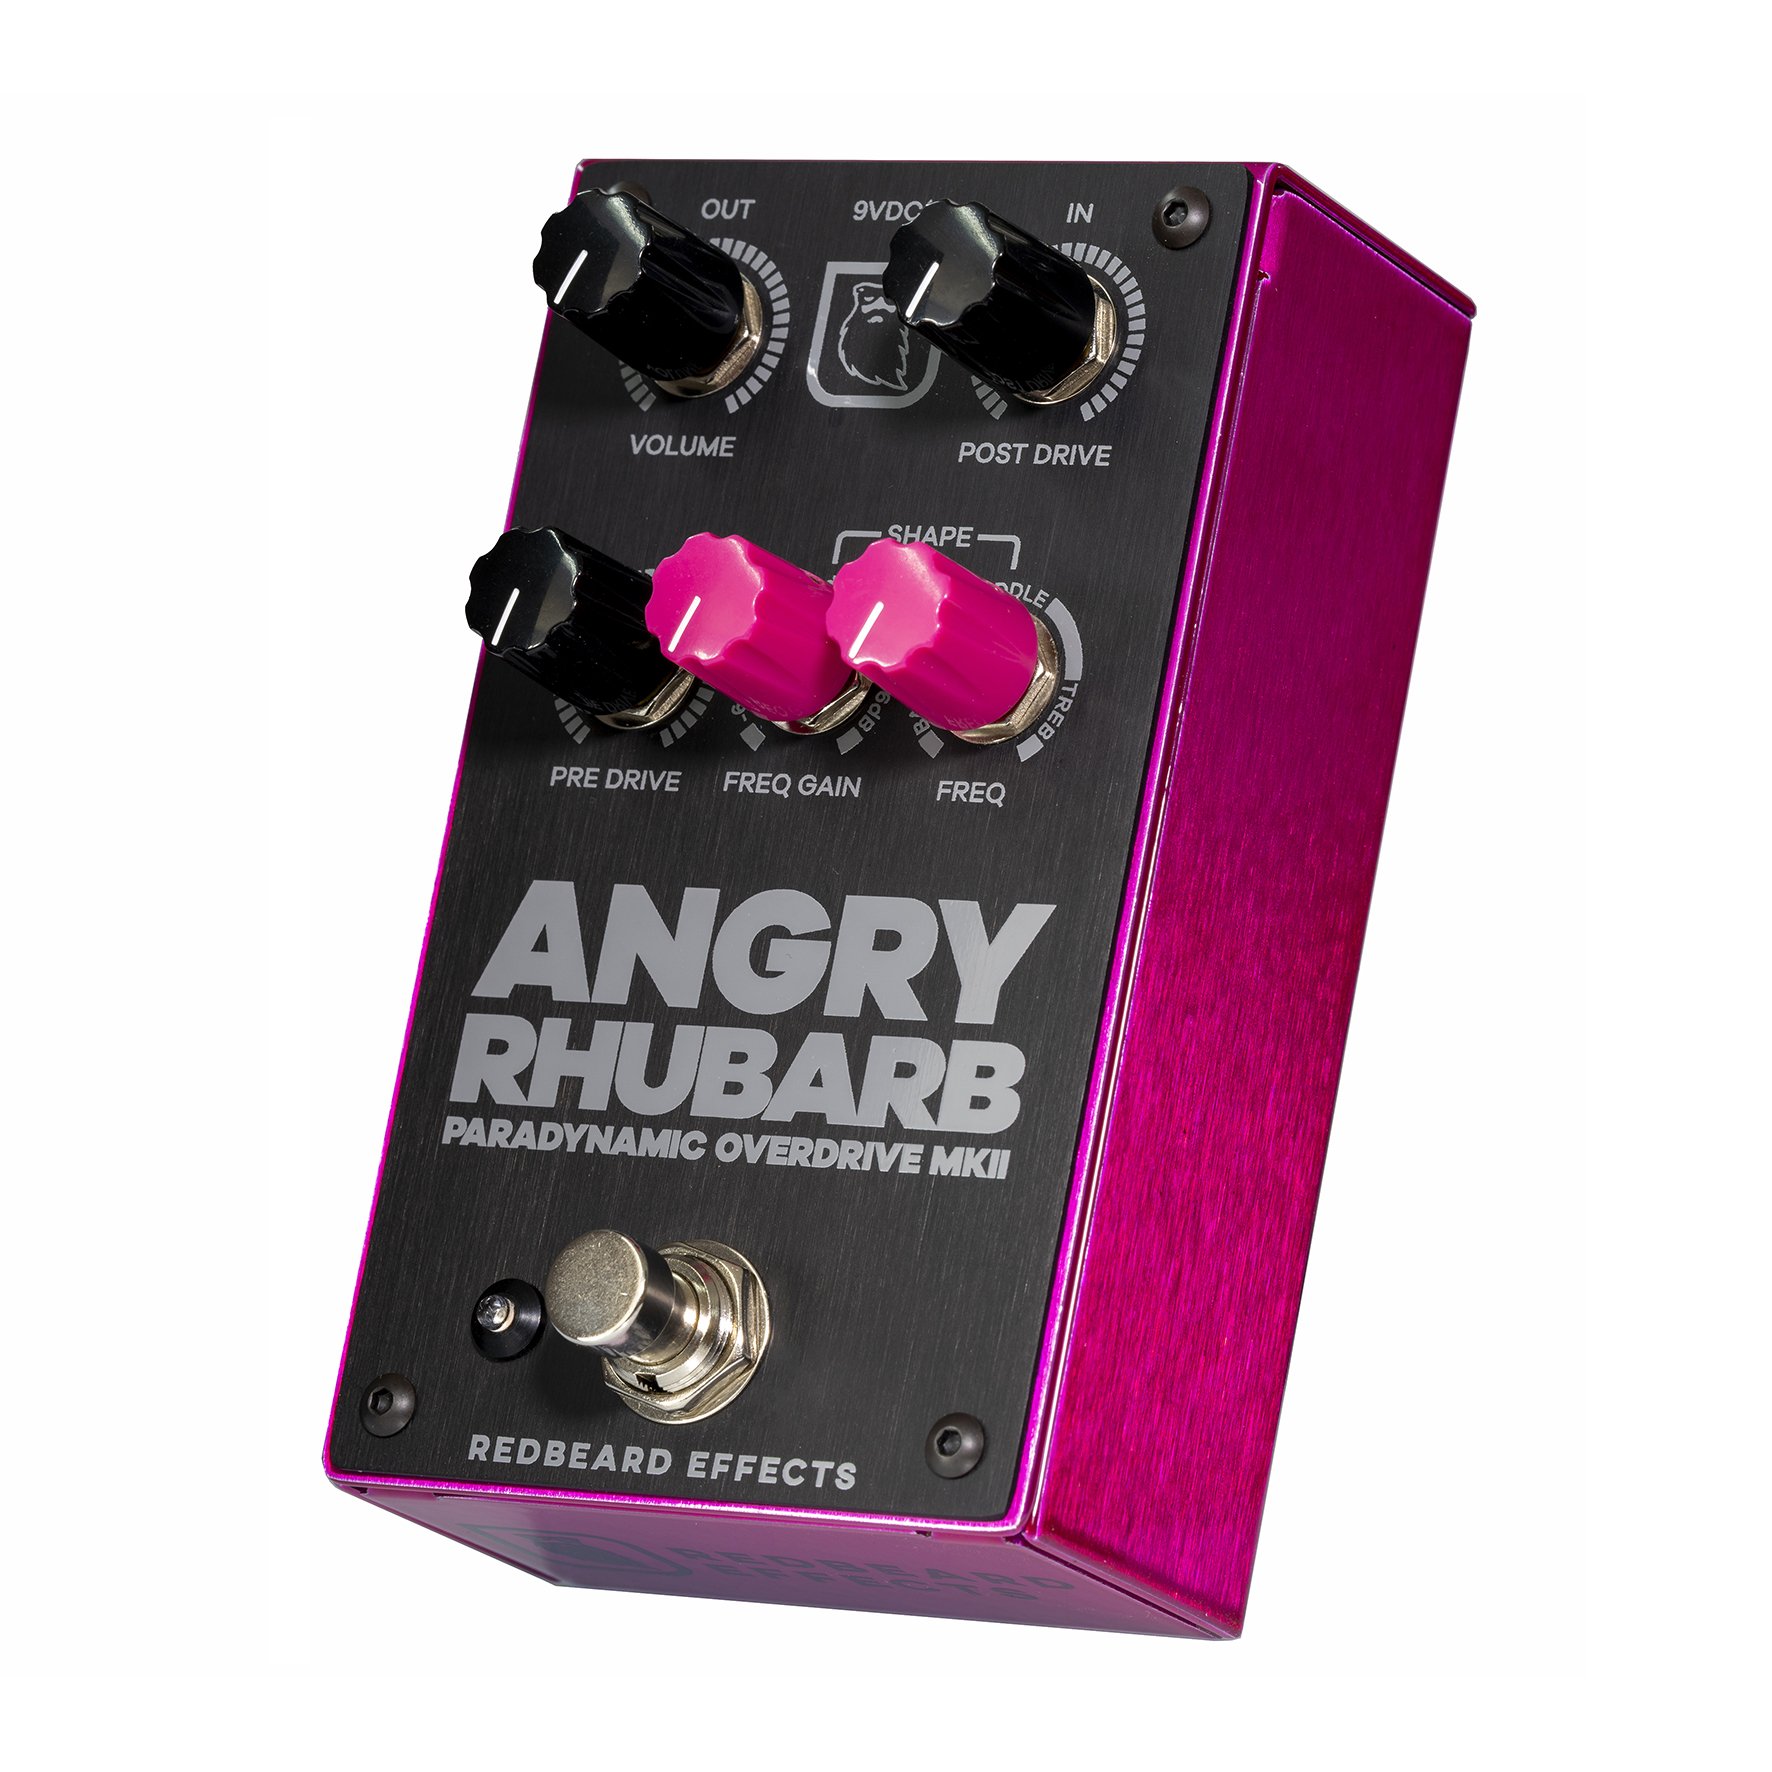 Redbeard Effects Angry Rhubarb Paradynamic Overdrive Mkii - Overdrive/Distortion/Fuzz Effektpedal - Variation 1